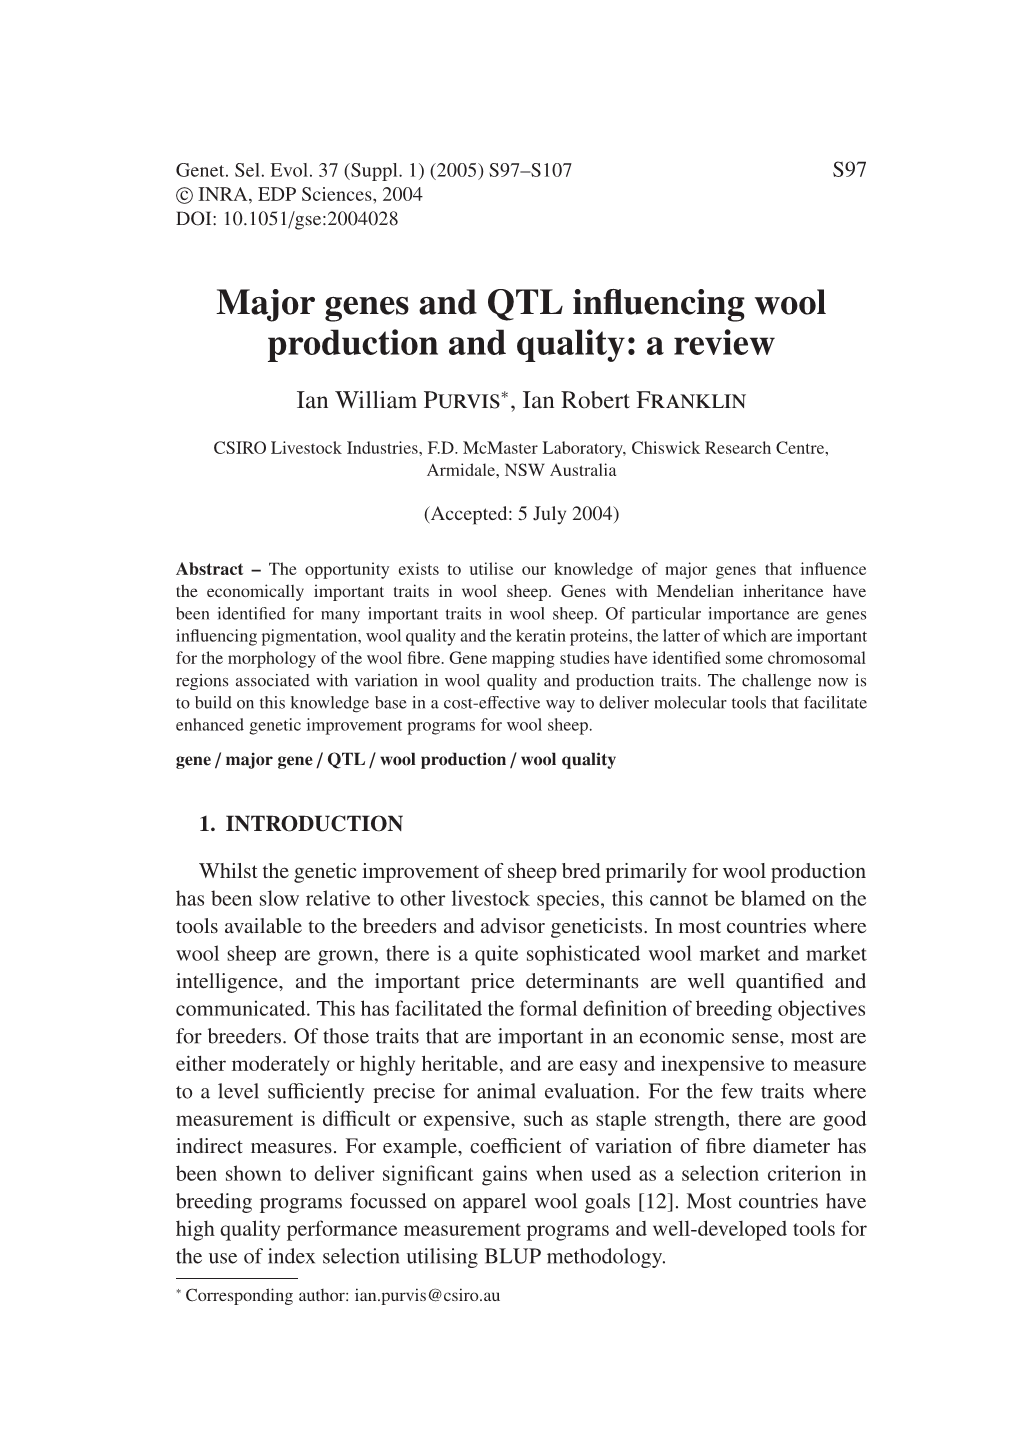 Major Genes and QTL Influencing Wool Production and Quality: a Review